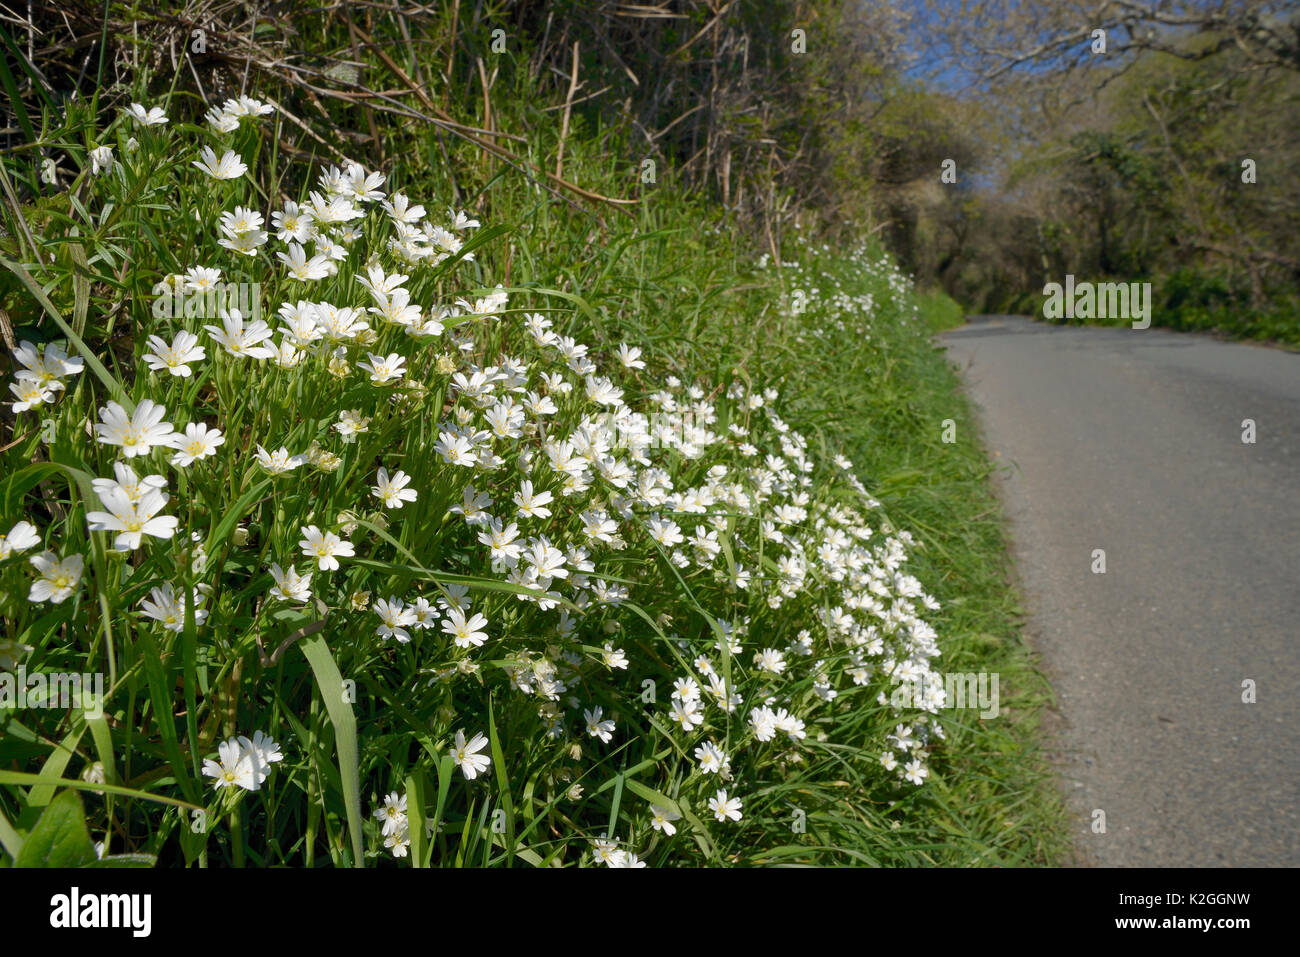 Greater stitchwort (Stellaria holostea) flowering on the grassy banked verge of a country lane, Cornwall, UK, April. Stock Photo